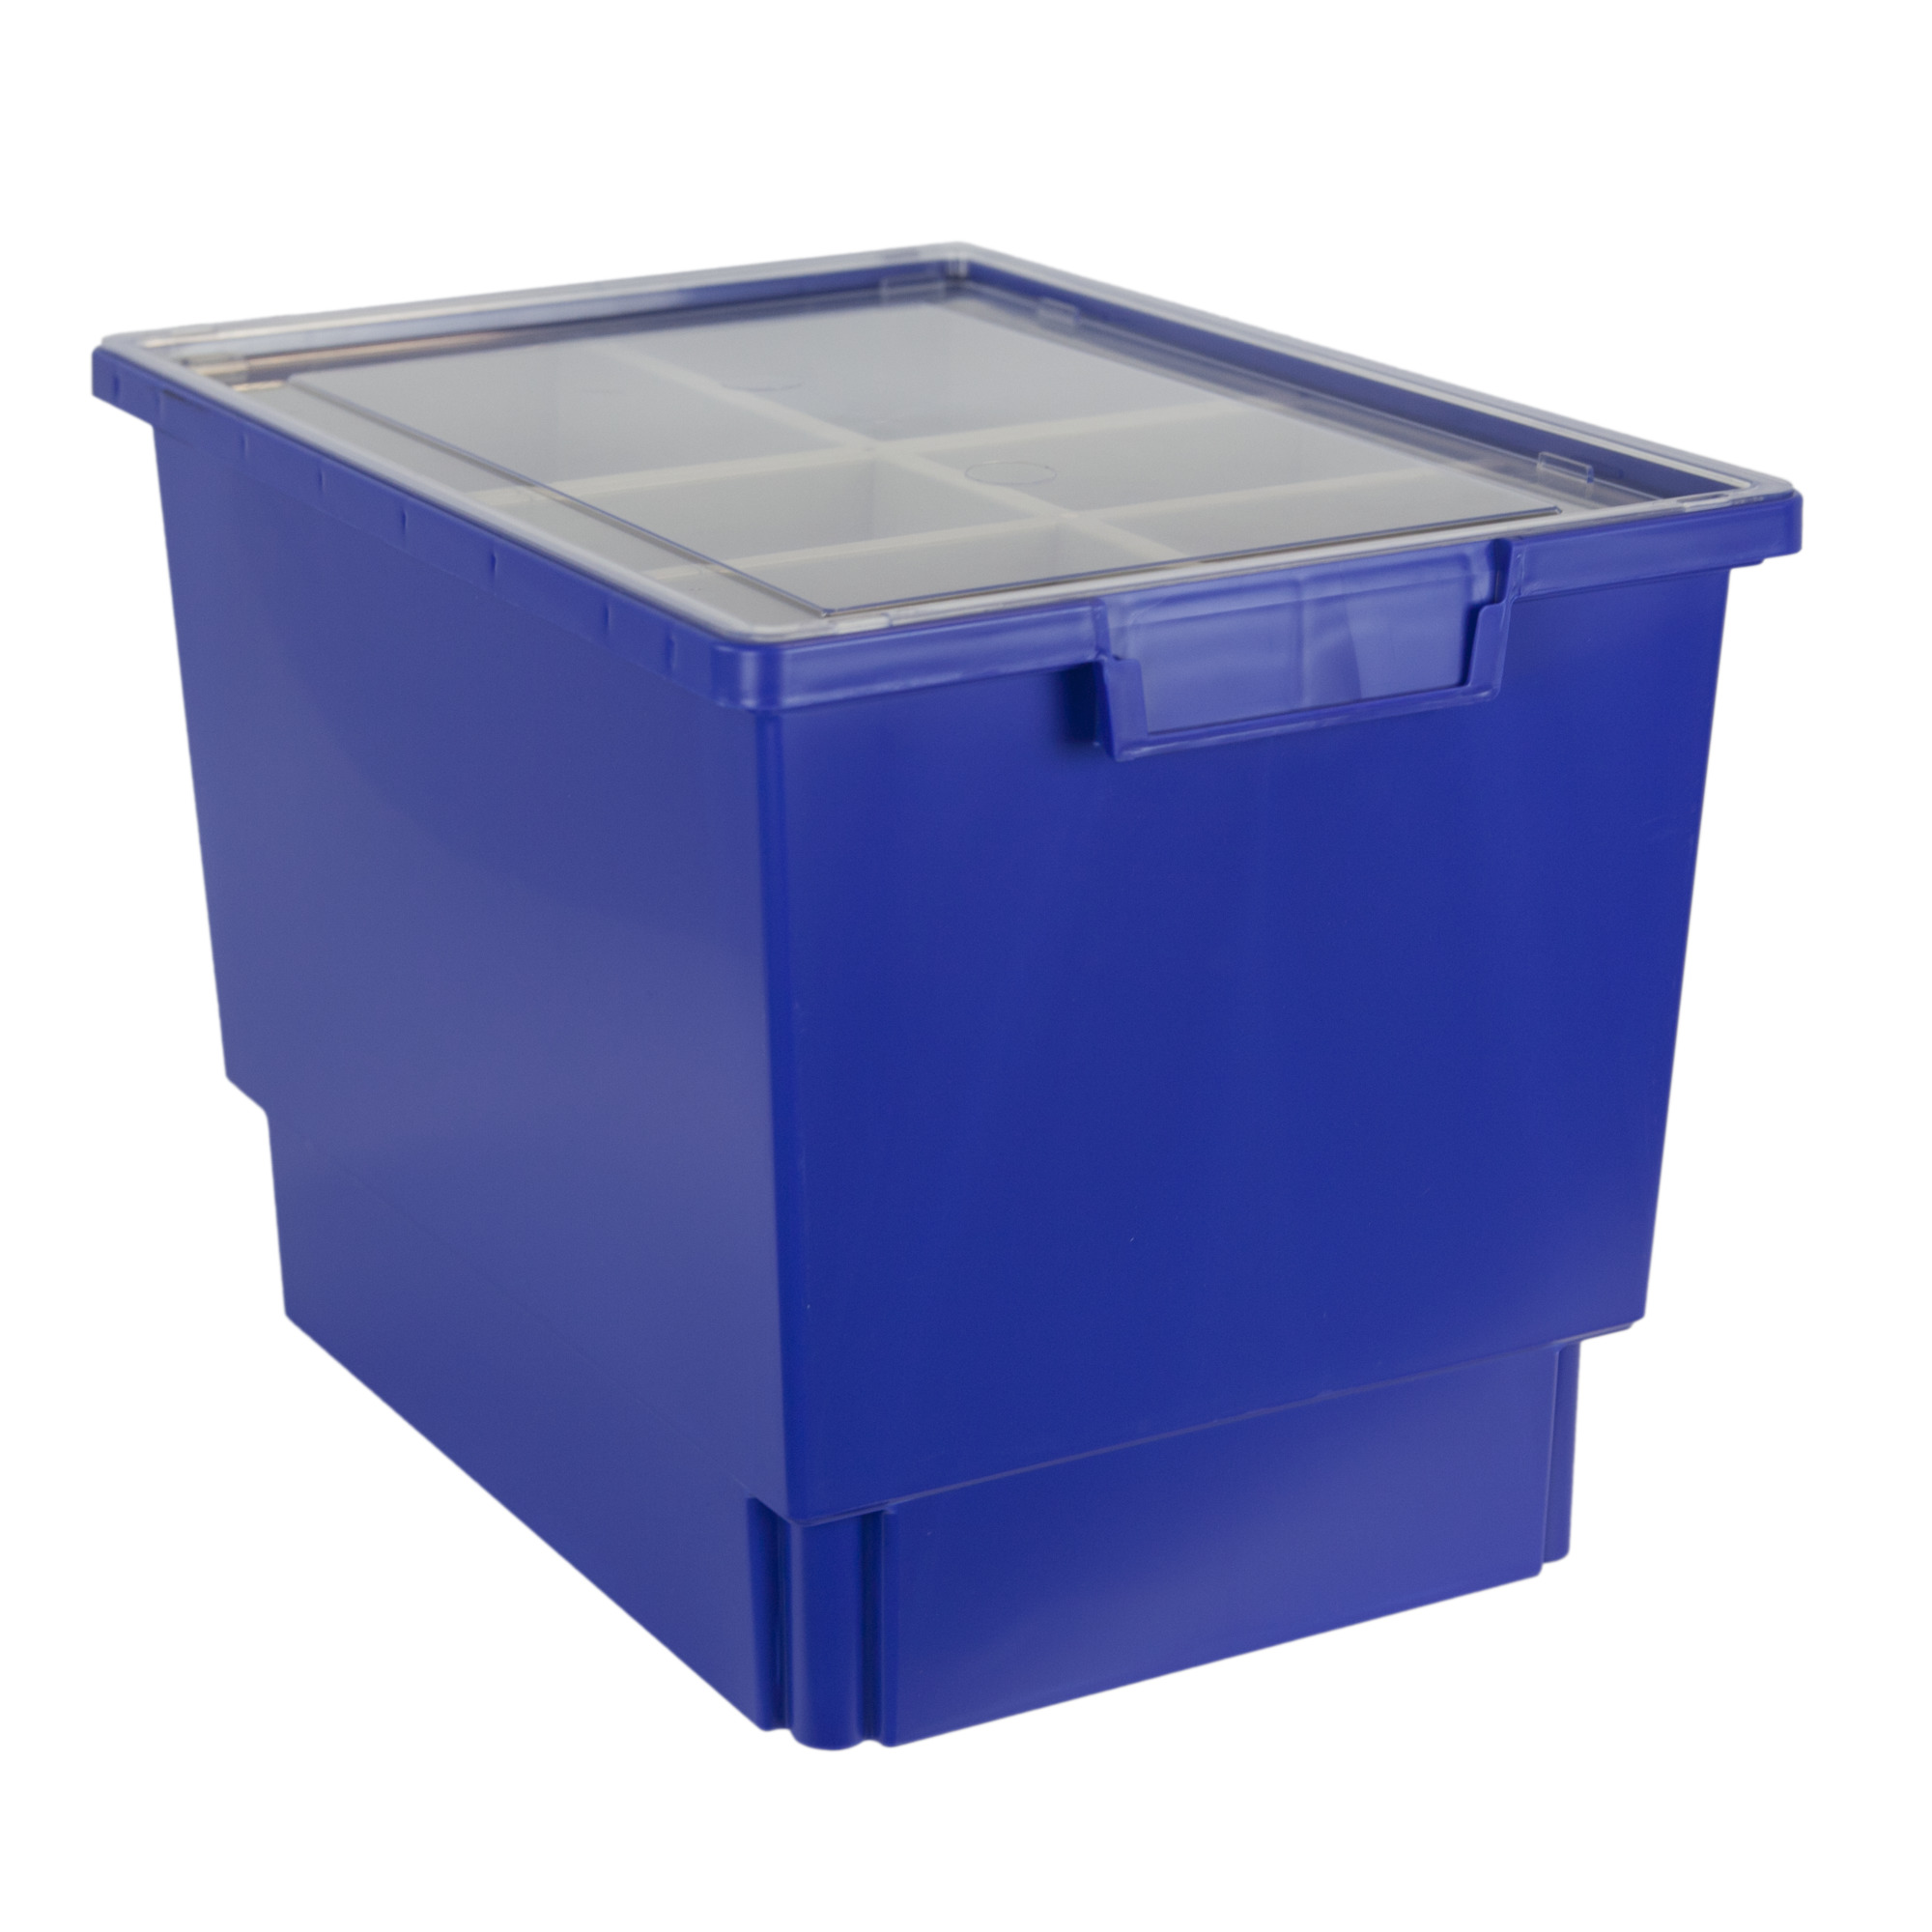 Certwood StorWerks, Slim Line 12Inch Tray Kit (6 x Divisions) Blue, Included (qty.) 1, Material Plastic, Height 12 in, Model CE1954PB-NK0300-1